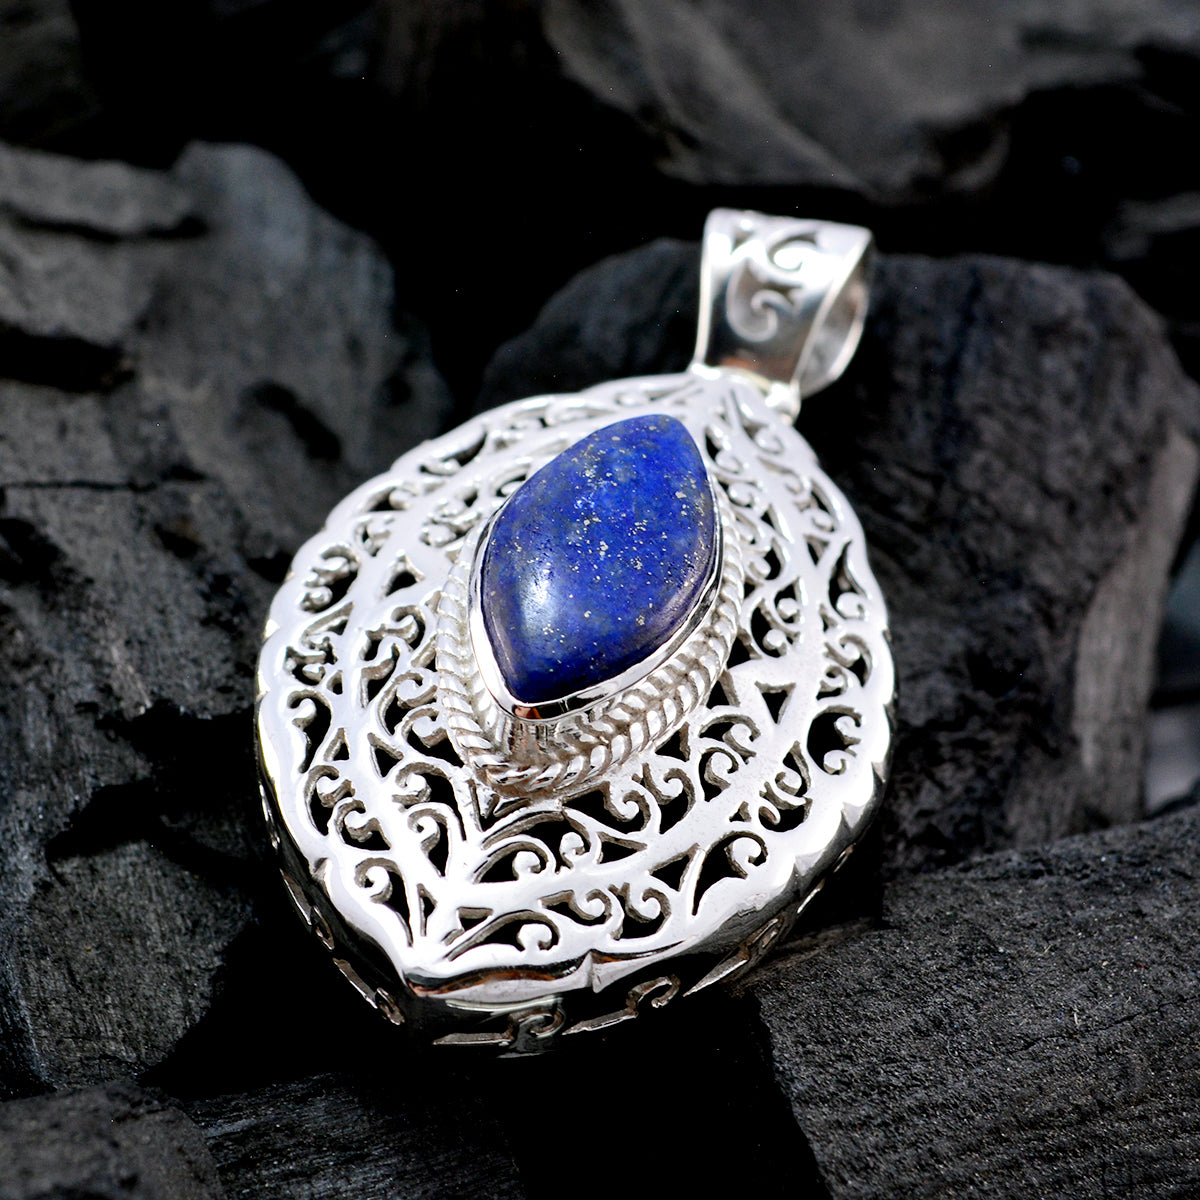 Riyo Natural Gemstone Marquise Cabochon Nevy Blue Lapis Lazuli Sterling Silver Pendant gift for labour day